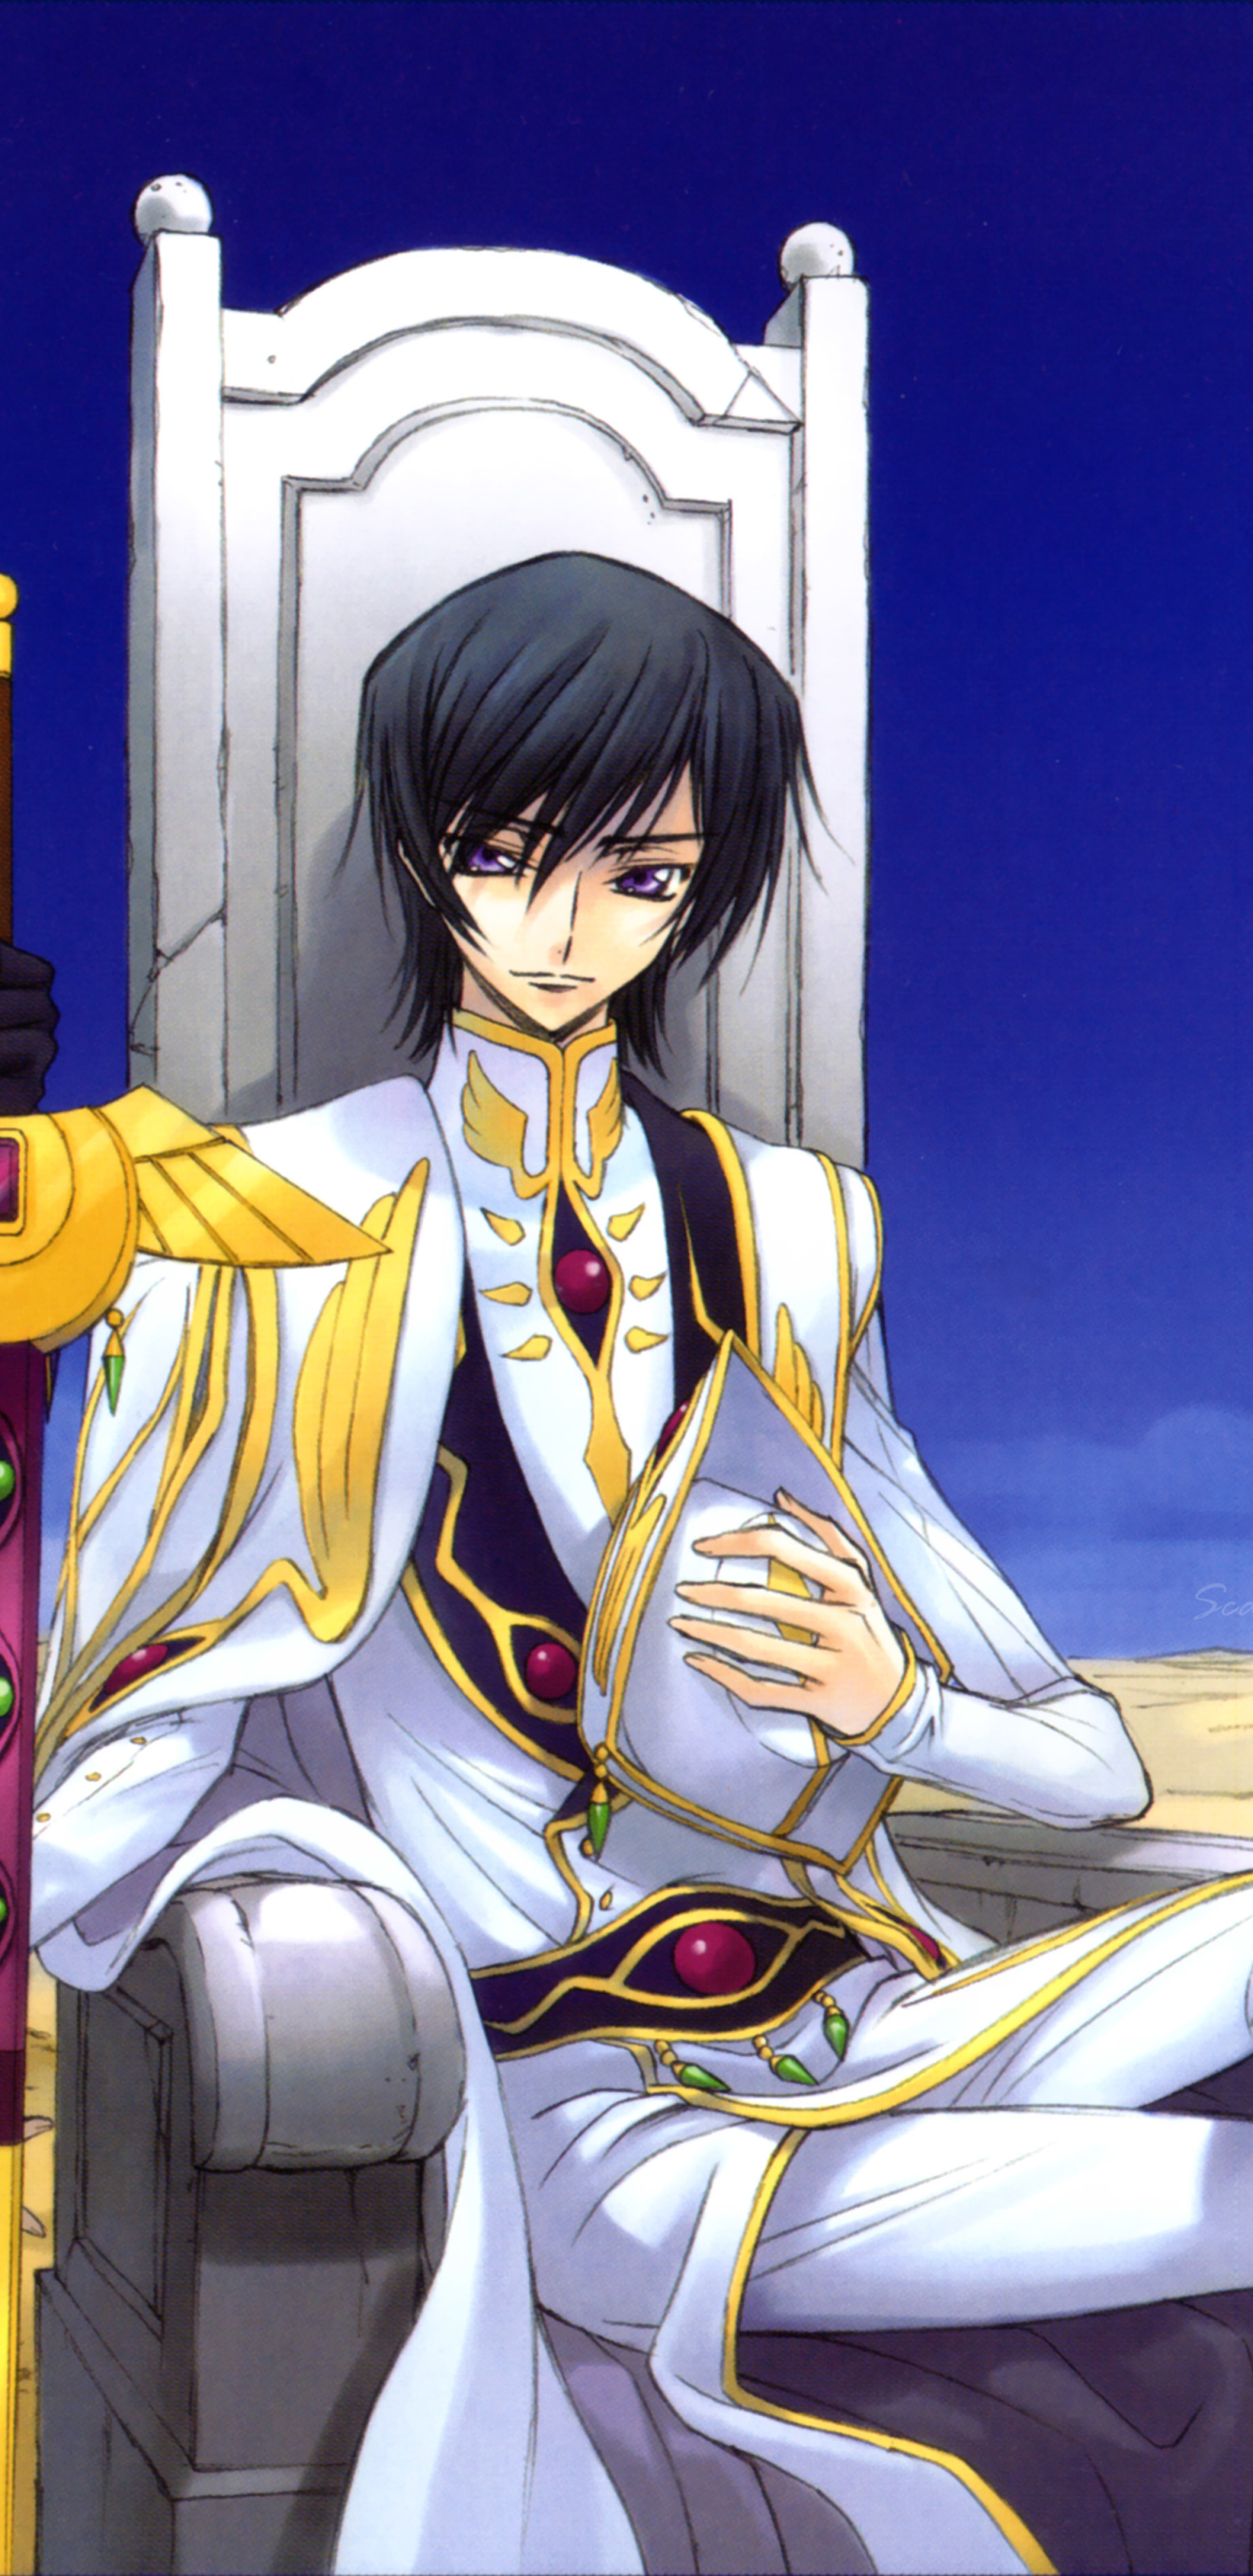 Lelouch Wallpapers - Top Free Lelouch Backgrounds - WallpaperAccess